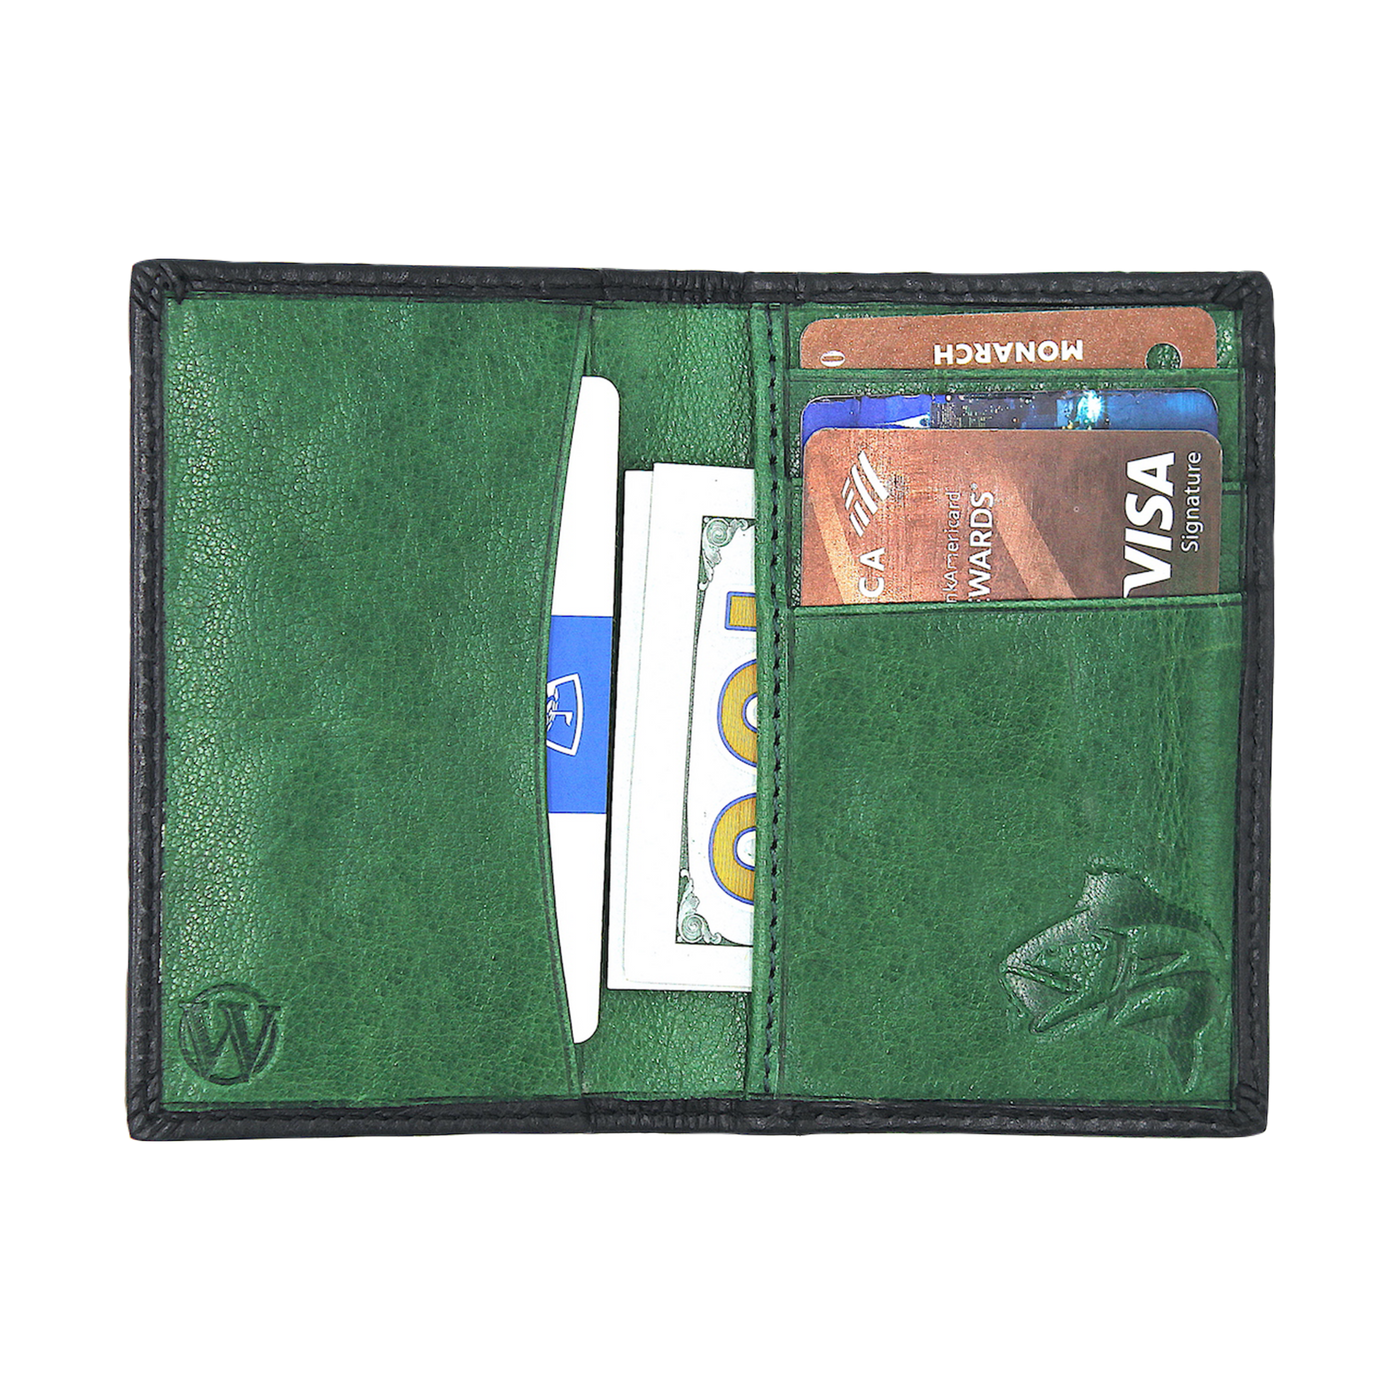 Our Pursuit Front Pocket Duo-Fold Bass Wallet brings an element of class with its premier full grain leather and bold hand-dyed color in the inner panels. The debossed bass provides a personalized touch for any devoted angler. 4 Card Slots 2 Interior Pockets Exterior Easy Access Pocket Slim Minimalist & Modern Design Dimensions: 4.3"L x 3"H RFID Protection Color: Black | Moss